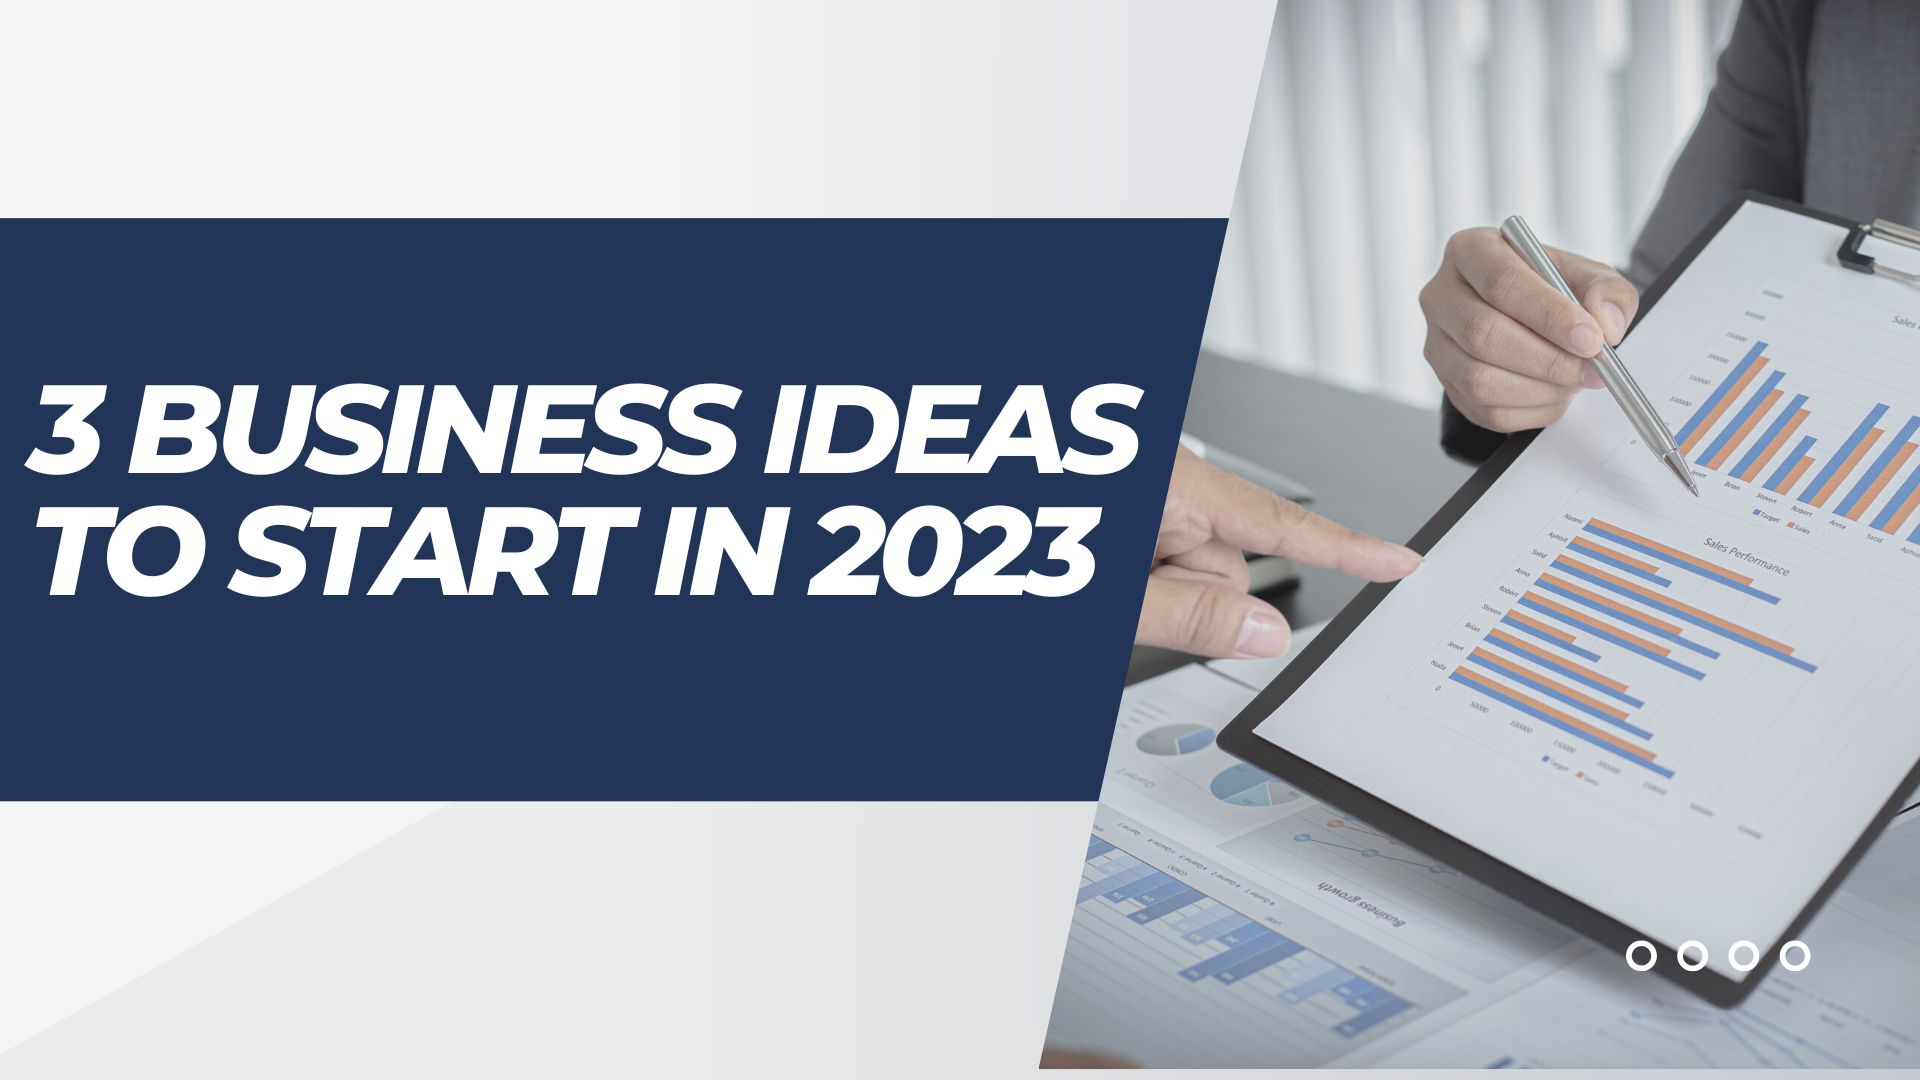 Business ideas to start in 2023